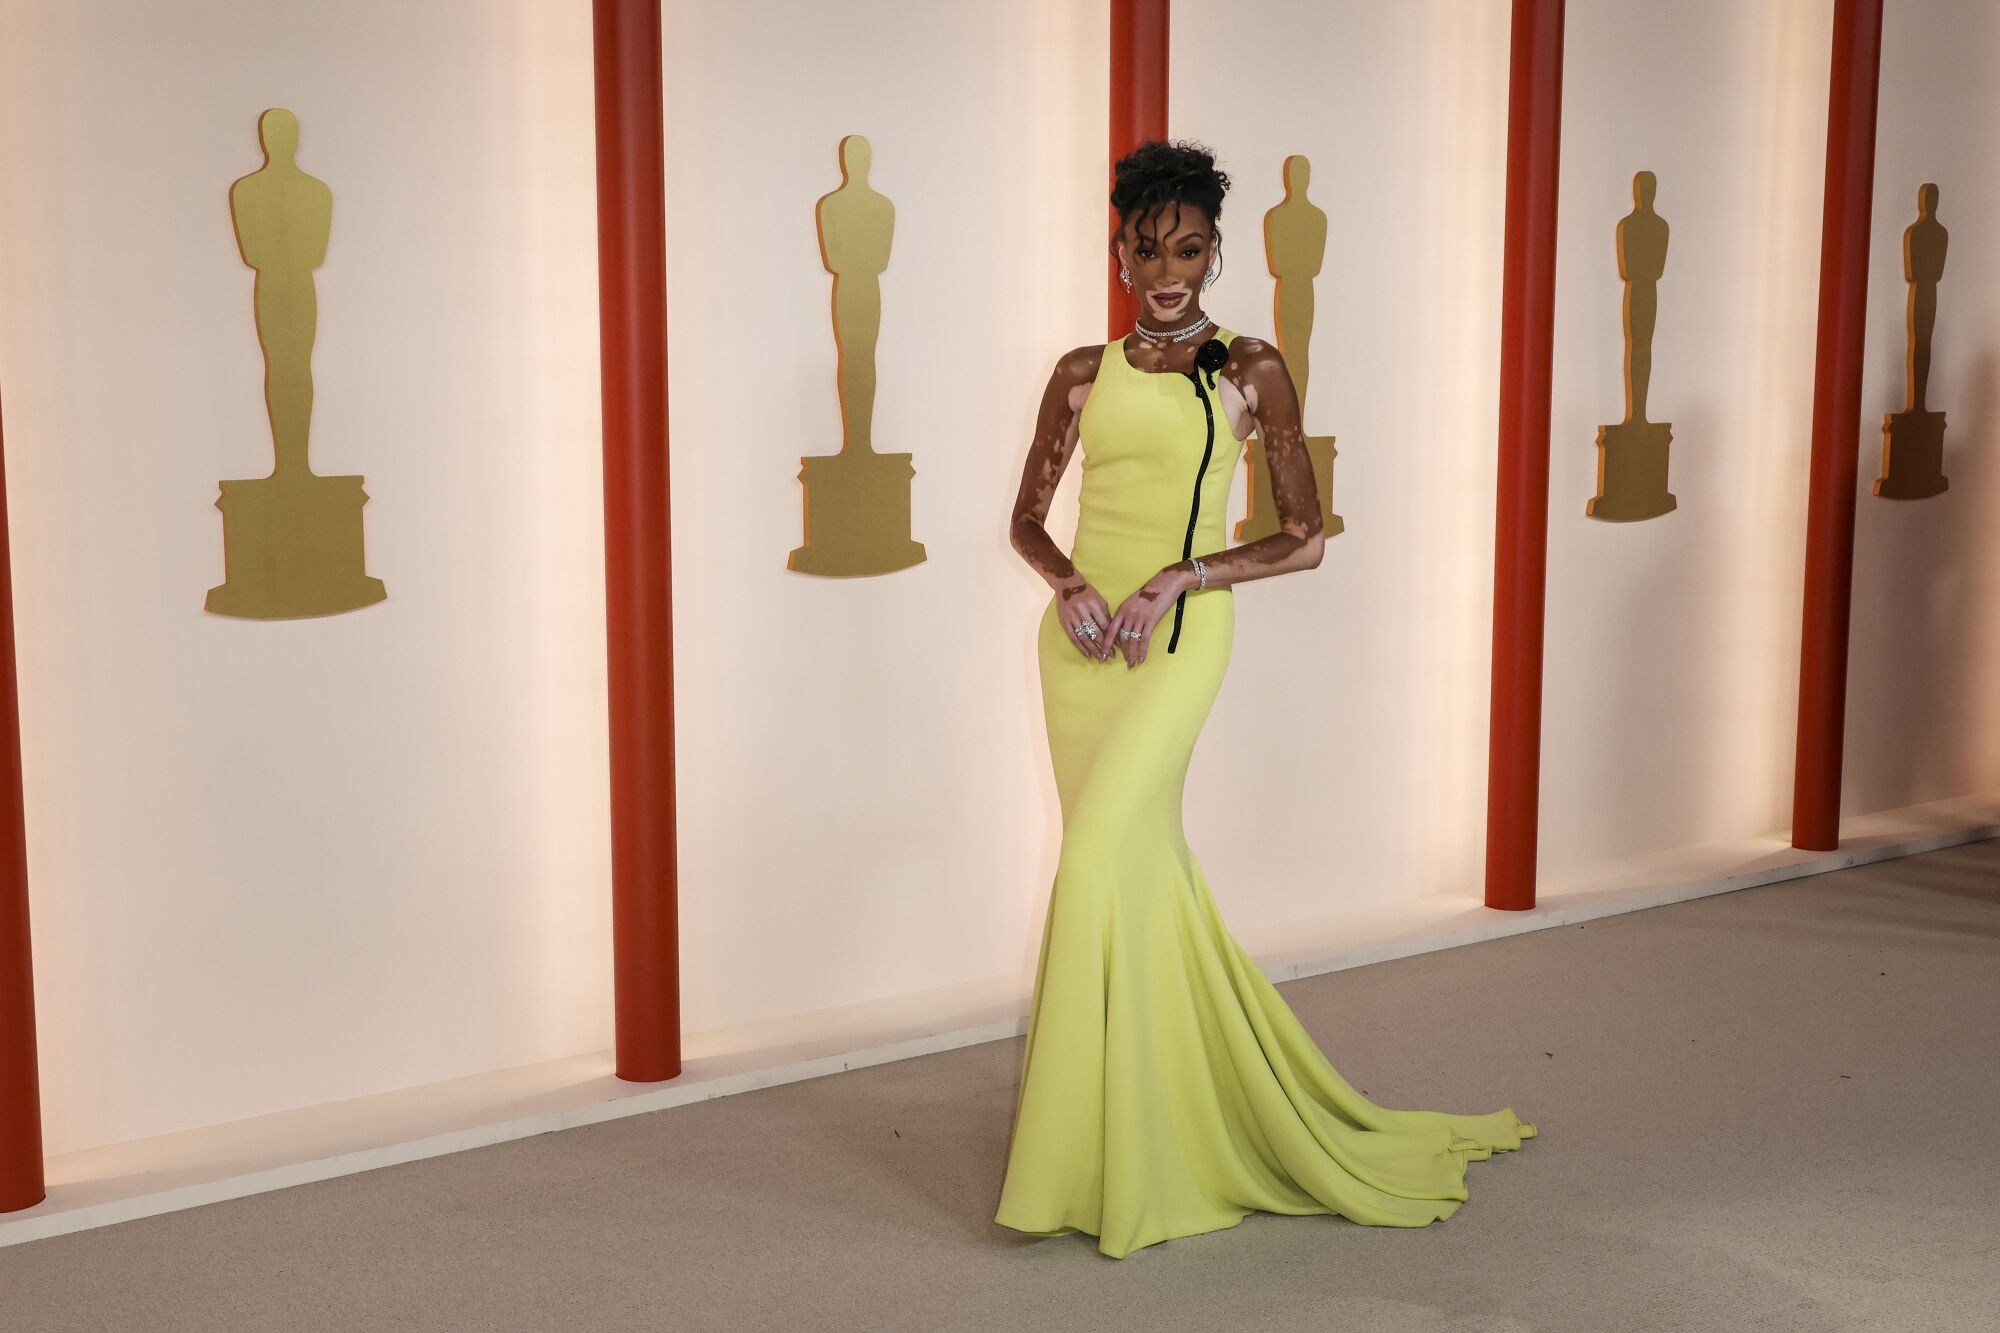 
Winnie Harlow in a diaphanous yellow sleeveless gown